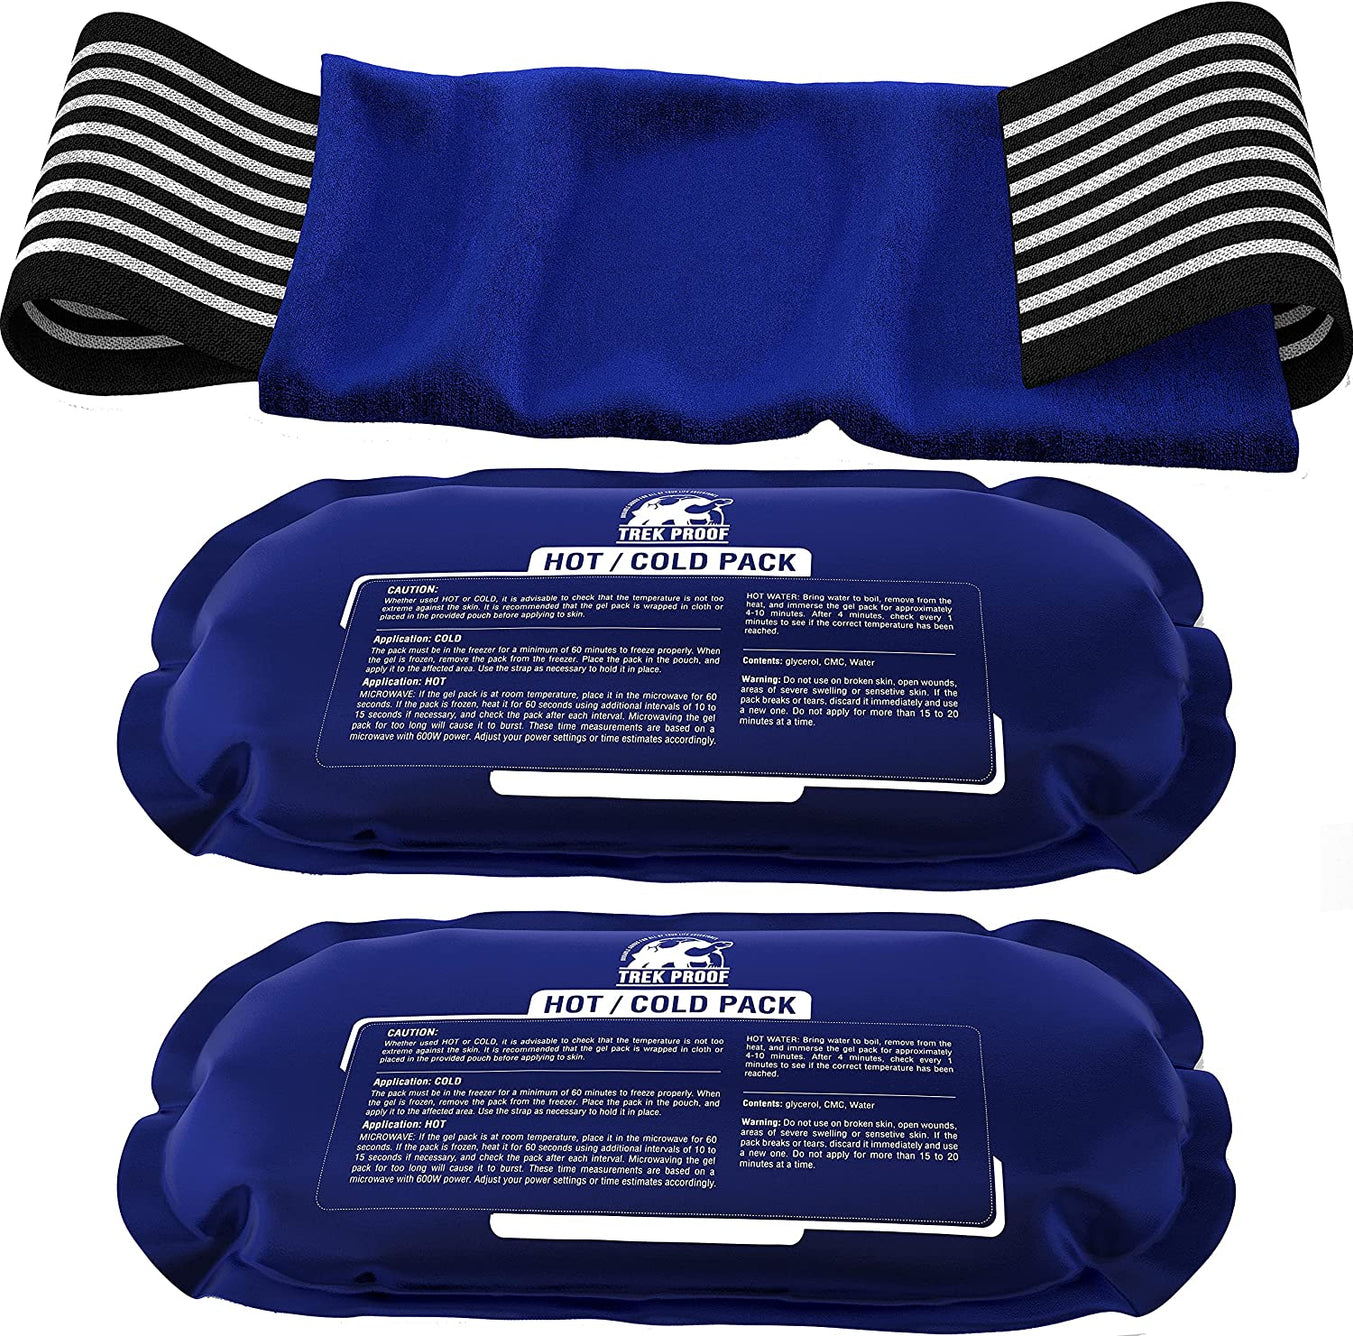 Trek Proof  -  Reusable Hot and Cold Therapy Ice Pack,  3-Piece Set,  Non Toxic Gel Wrap Support Injury Recovery, Alleviate Joint and Muscle Pain – Rotator Cuff, Knees, Back, headache relief and more